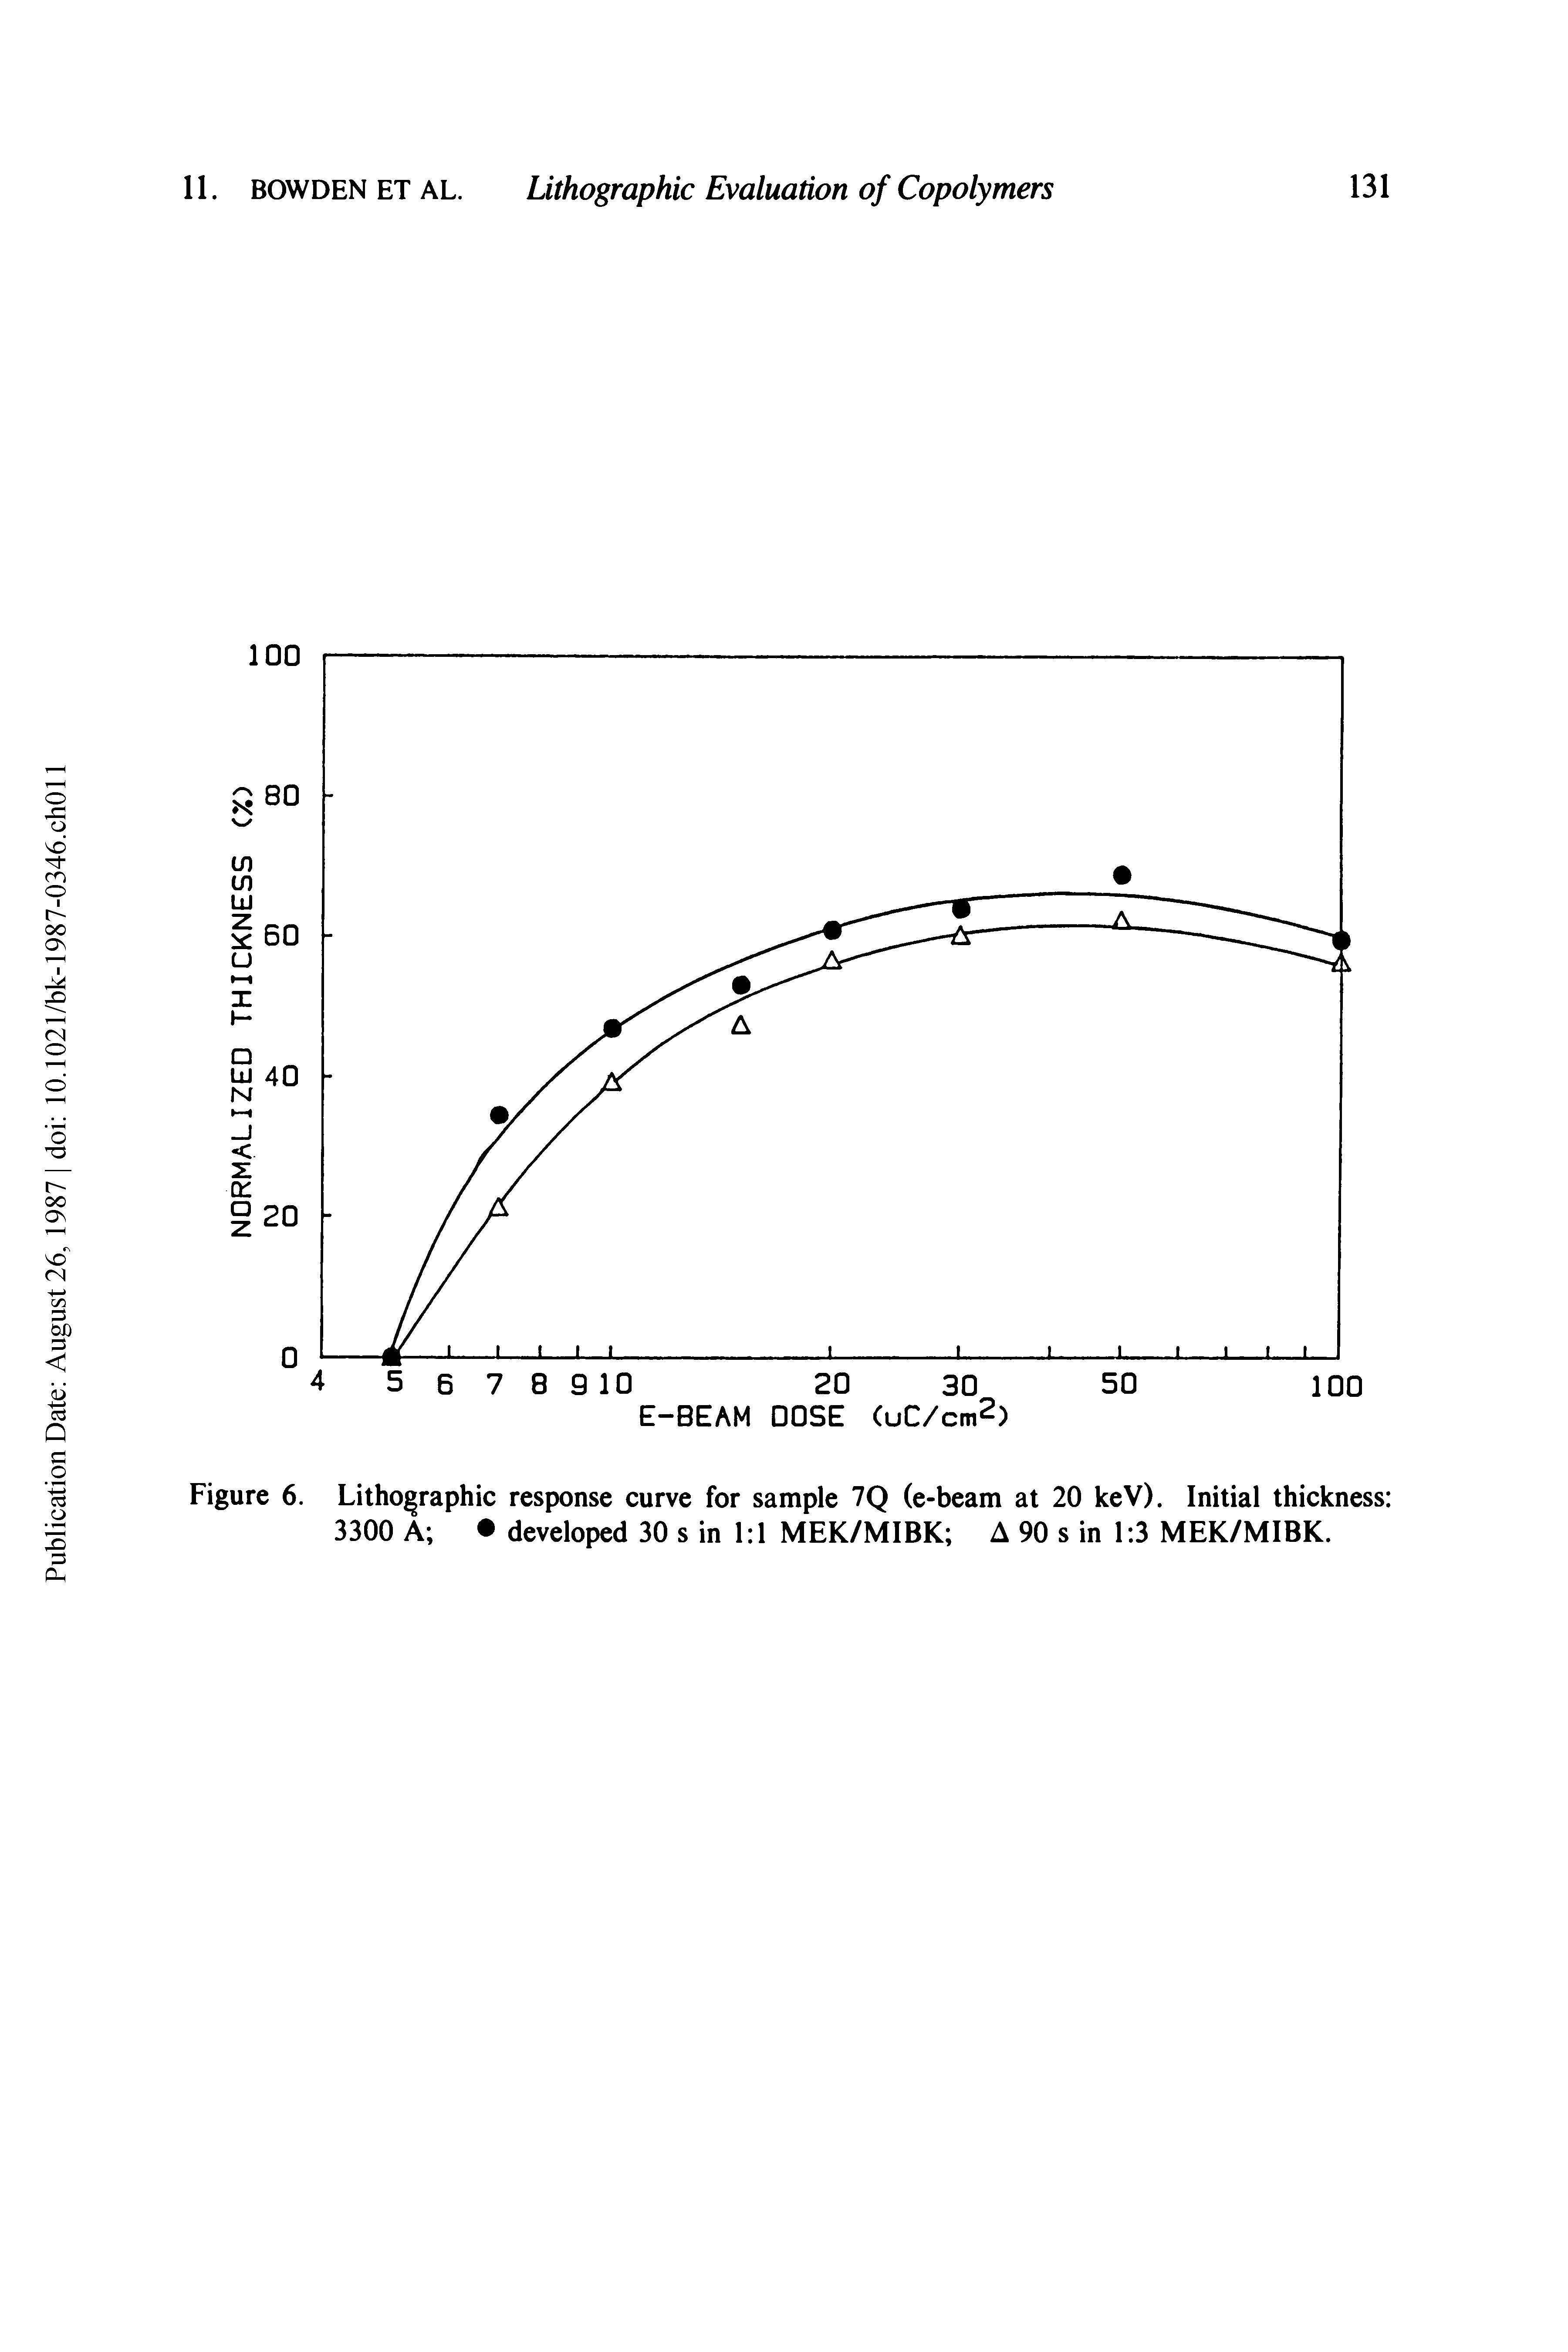 Figure 6. Lithographic response curve for sample 7Q (e-beam at 20 keV). Initial thickness 3300 A developed 30 s in 1 1 MEK/MIBK A 90 s in 1 3 MEK/MIBK.